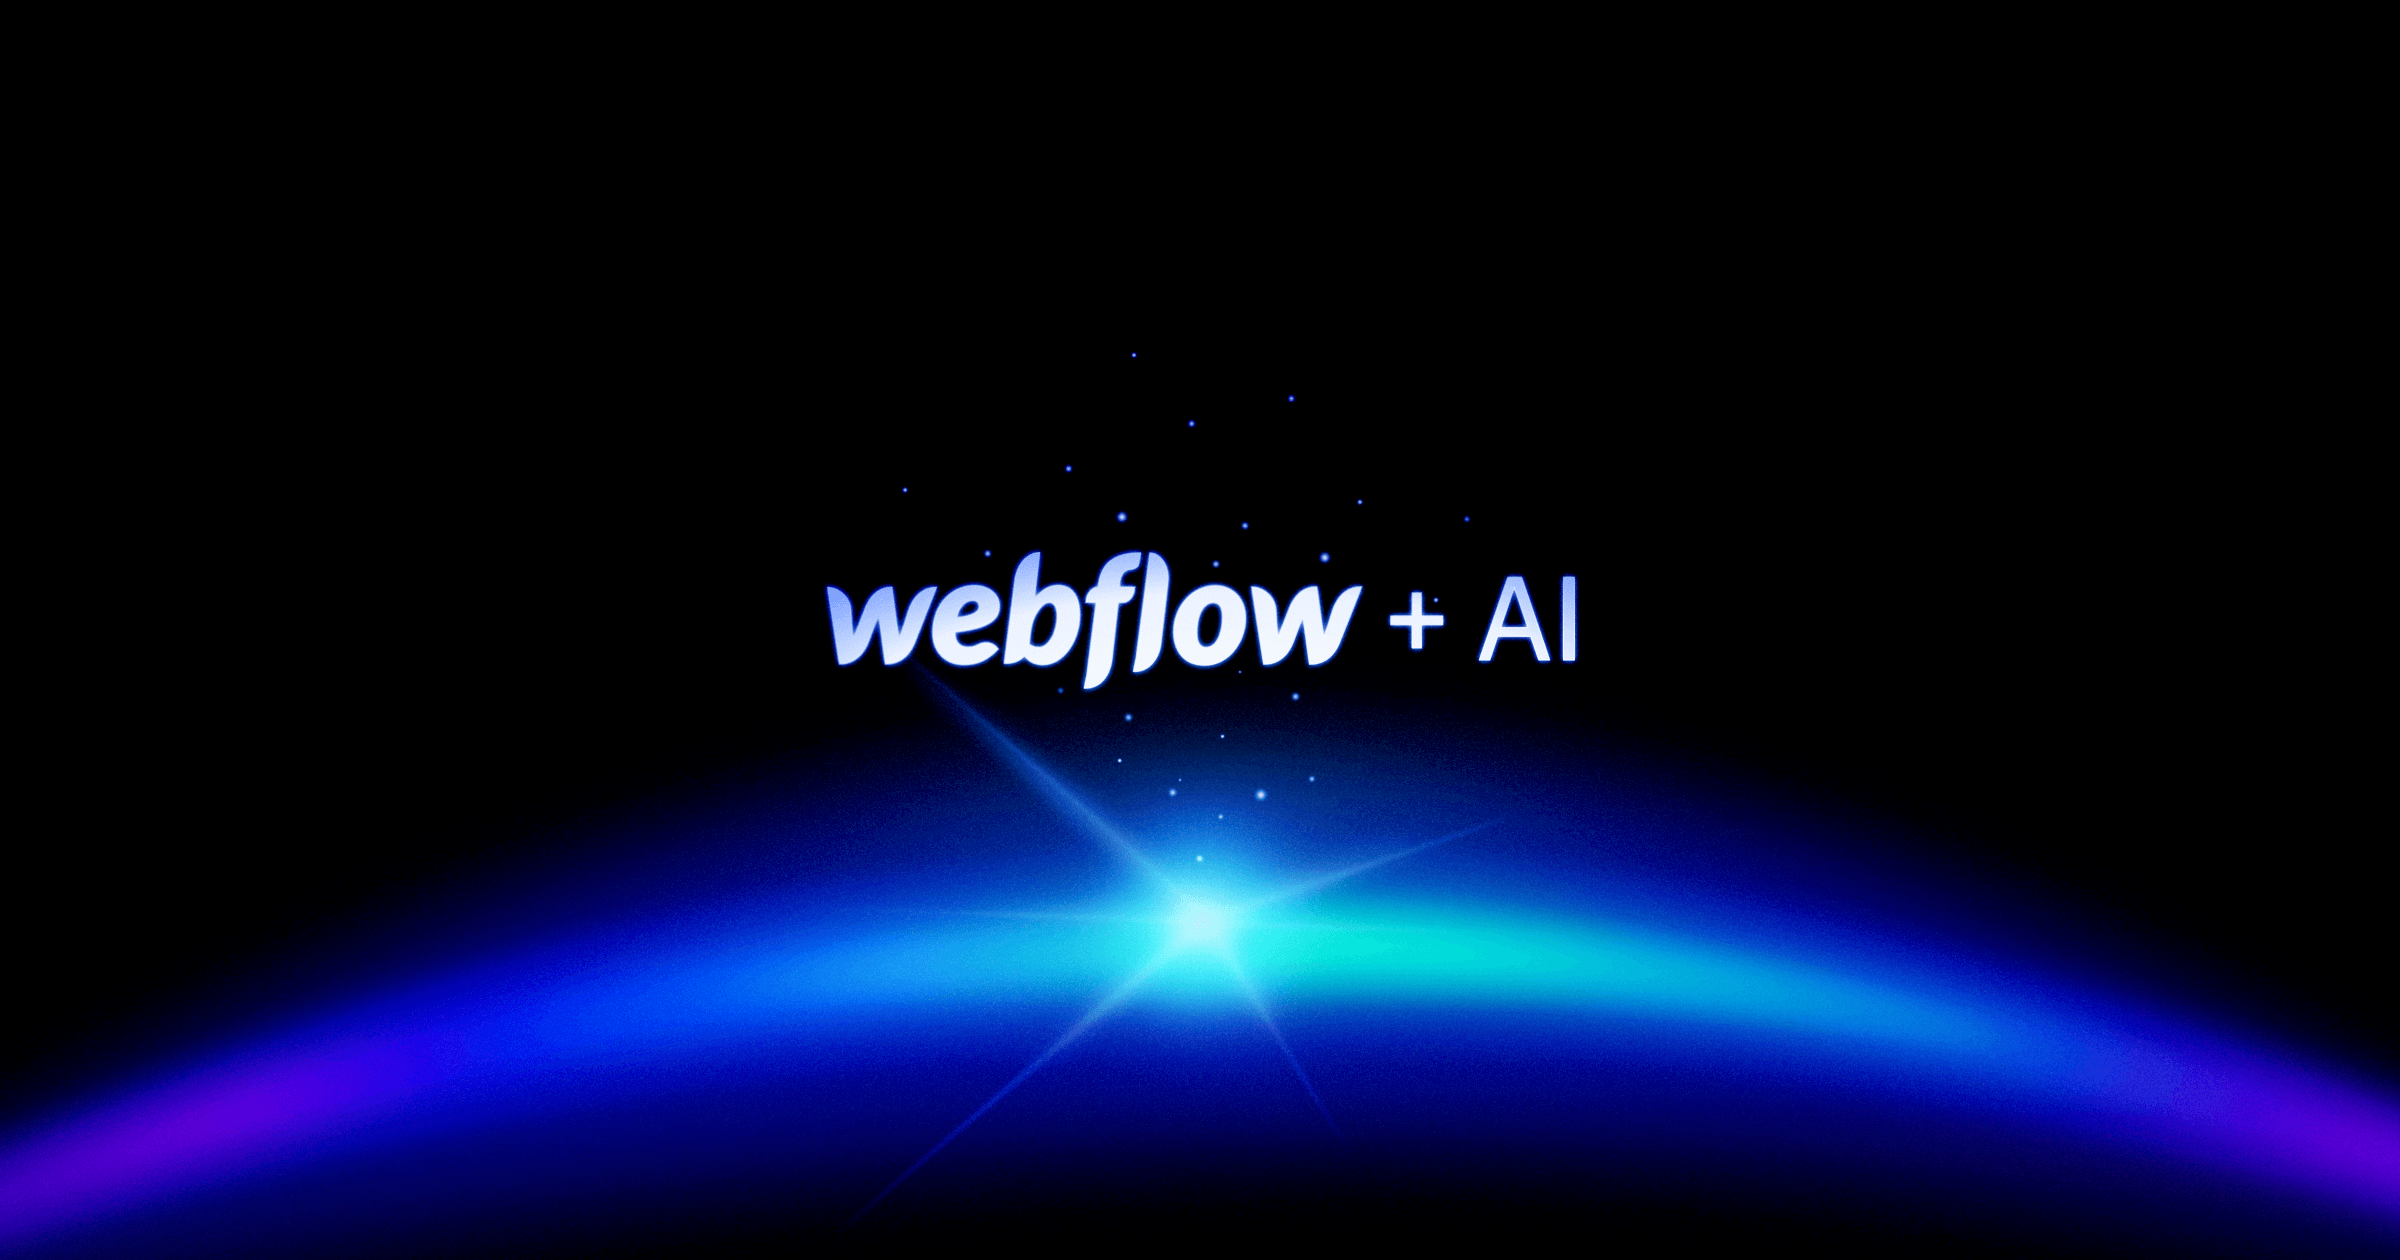 Behind the Scenes: Creating a Stunning Website with Webflow